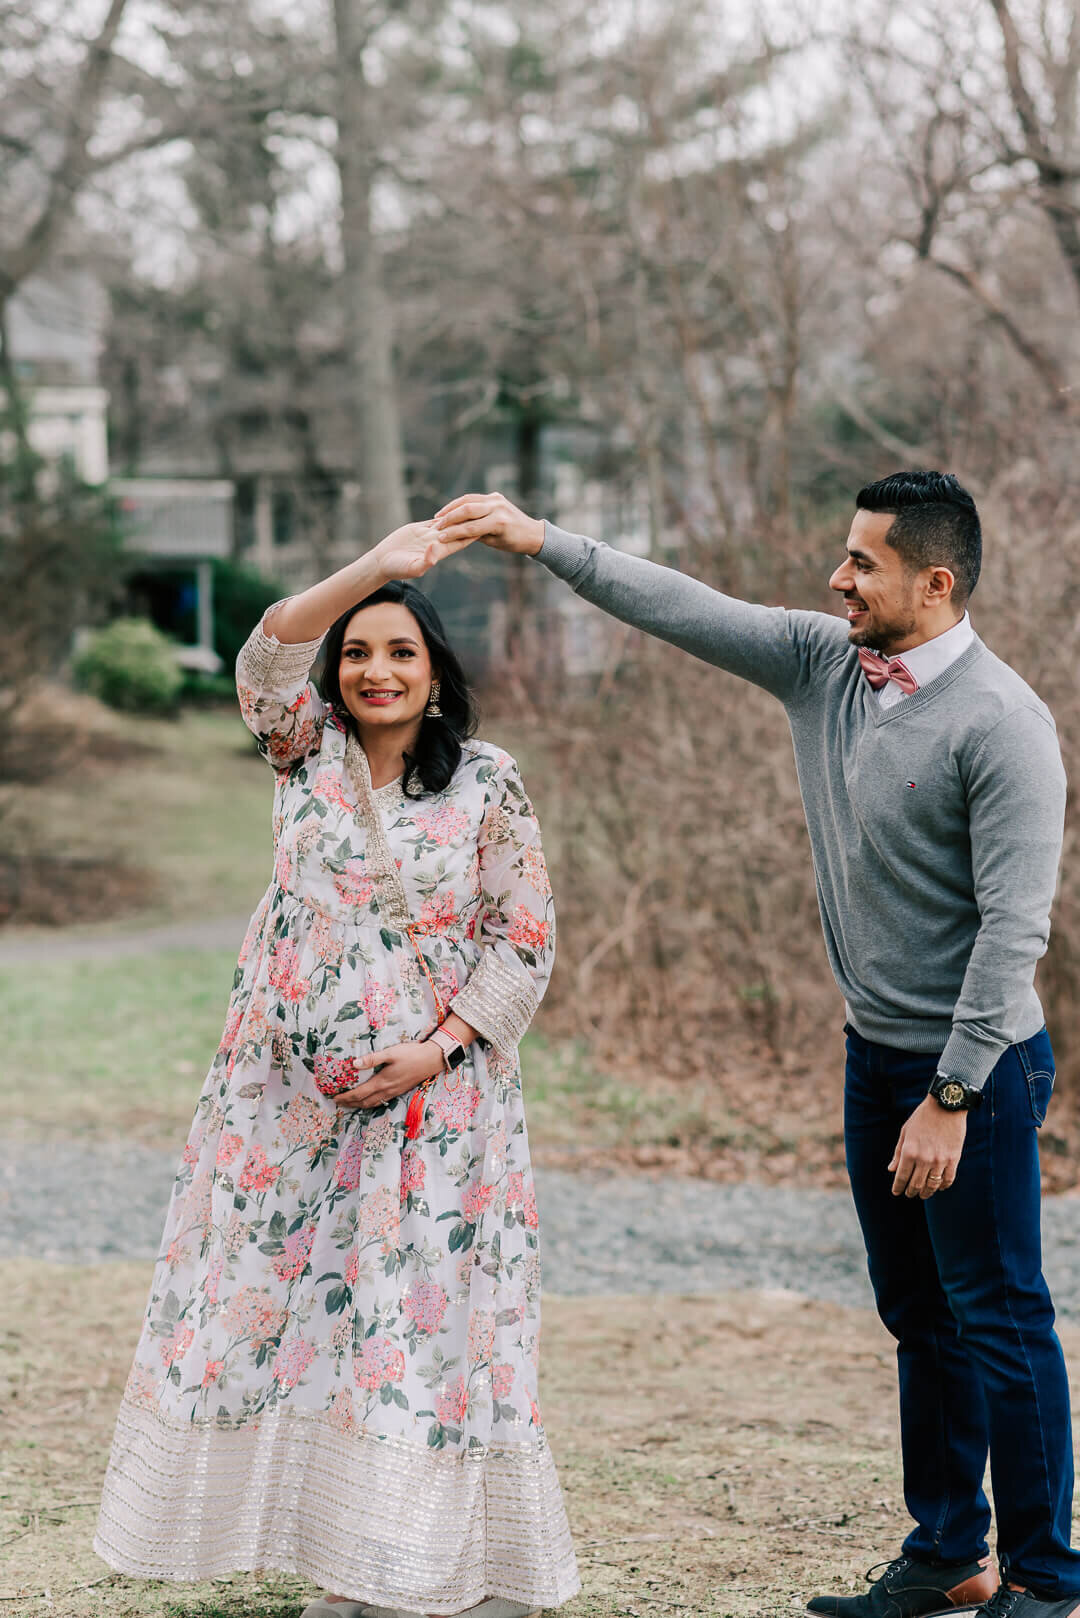 A couple enjoying  taking maternity photos at their baby shower, taken by northern virginia maternity photographer